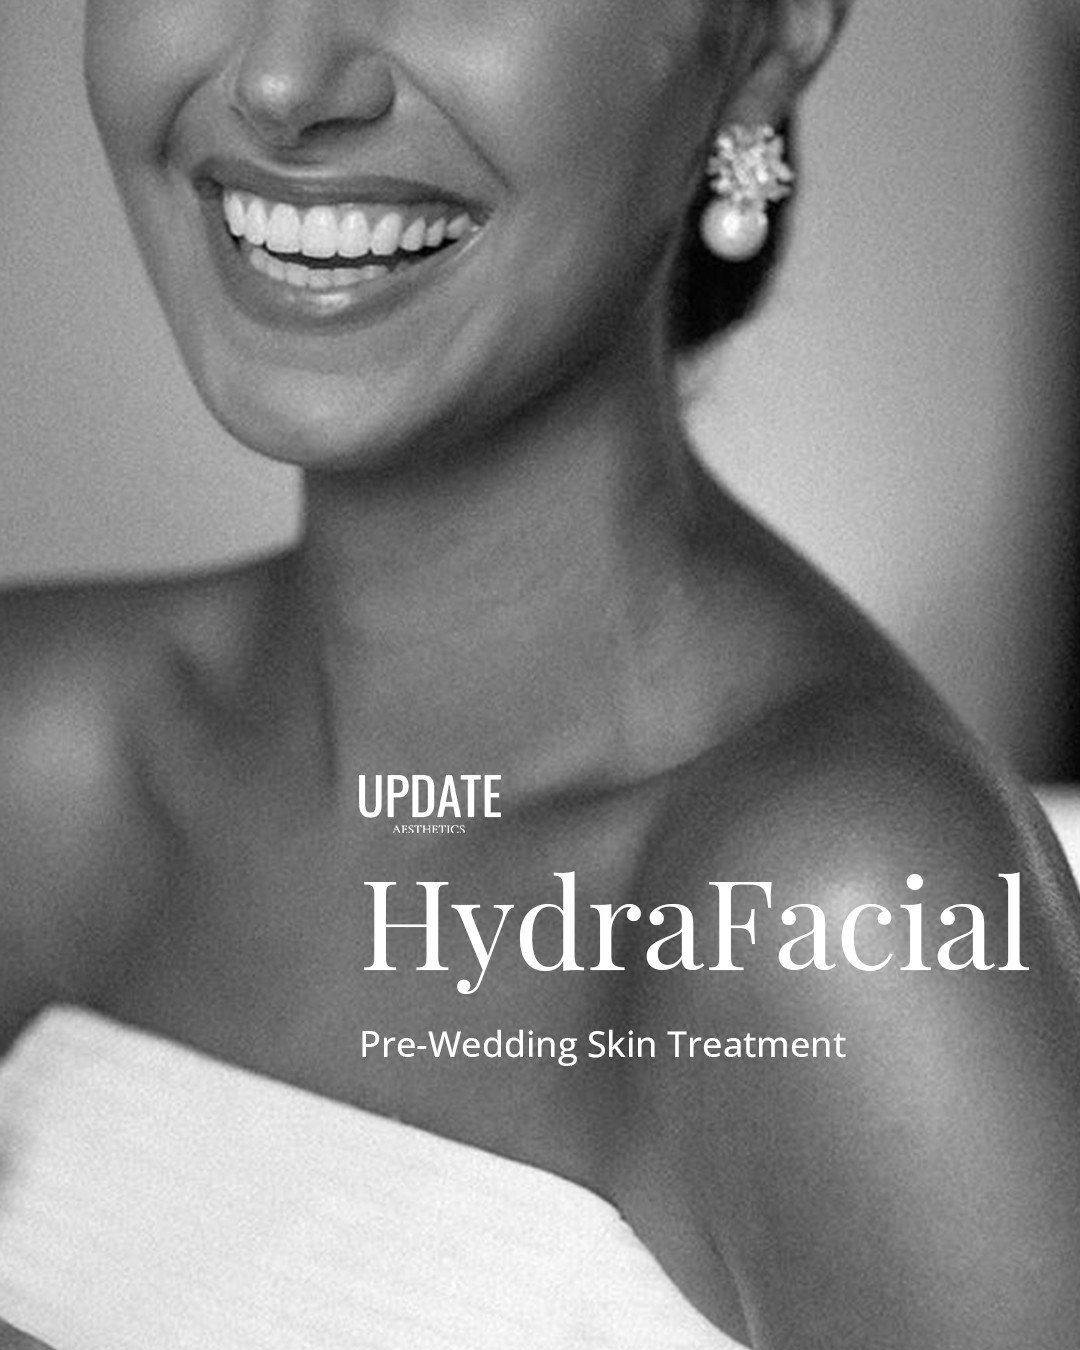 Prepping for your big day? ✨ ⁠
⁠
Get wedding-ready with Hydrafacial at Update Aesthetics! ⁠
⁠
Deep clean, hydrate, and glow in just one session. ⁠
⁠
#WeddingSkincare #HydrafacialGlow #London #HarleyStreet #Truro #Cornwall #NaturalAesthetics #NursePra